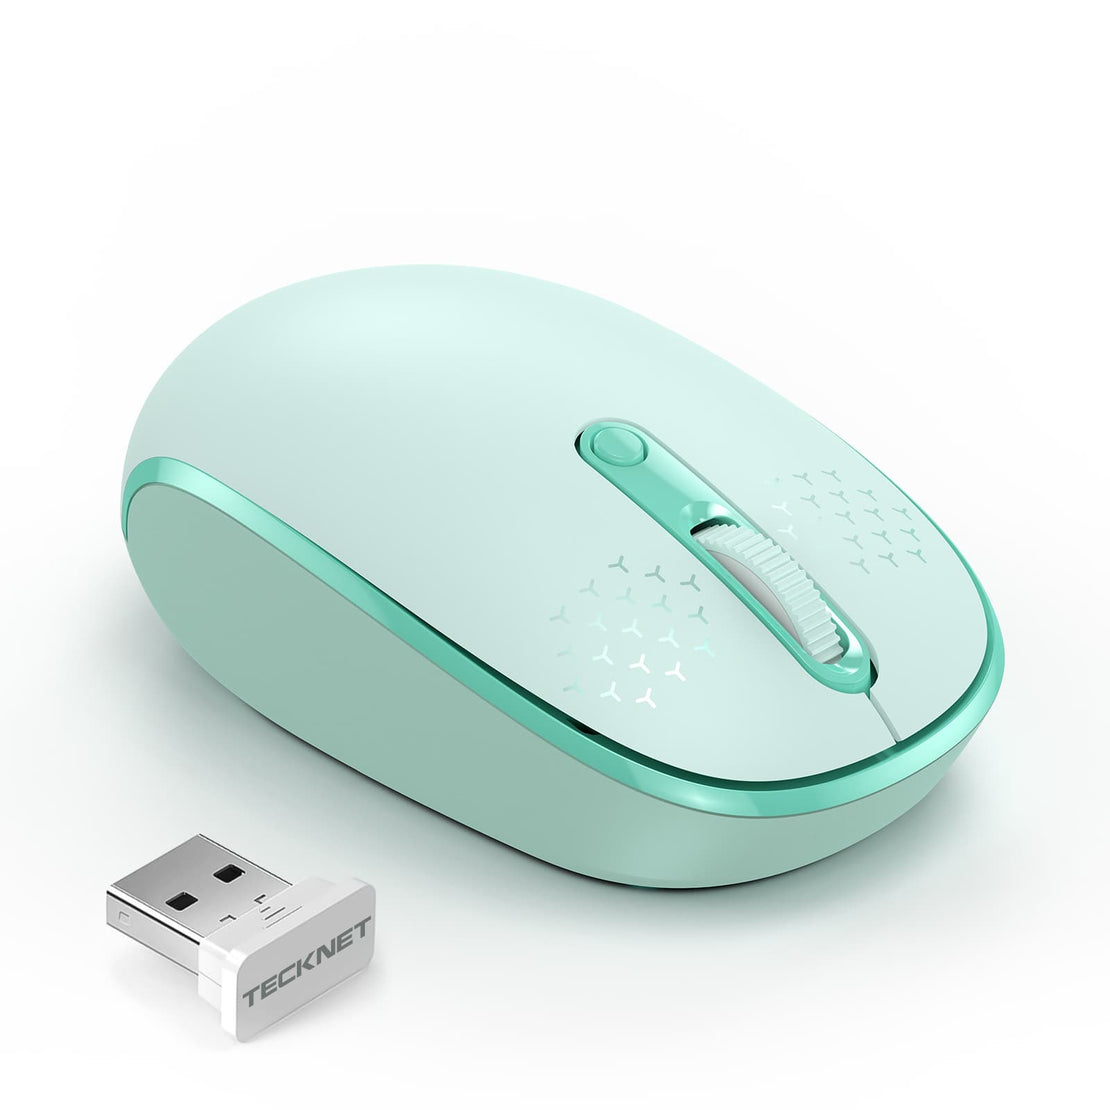 TECKNET 2.4G Silent Wireless Mouse with USB Receiver, 800/1200/1600 DPI